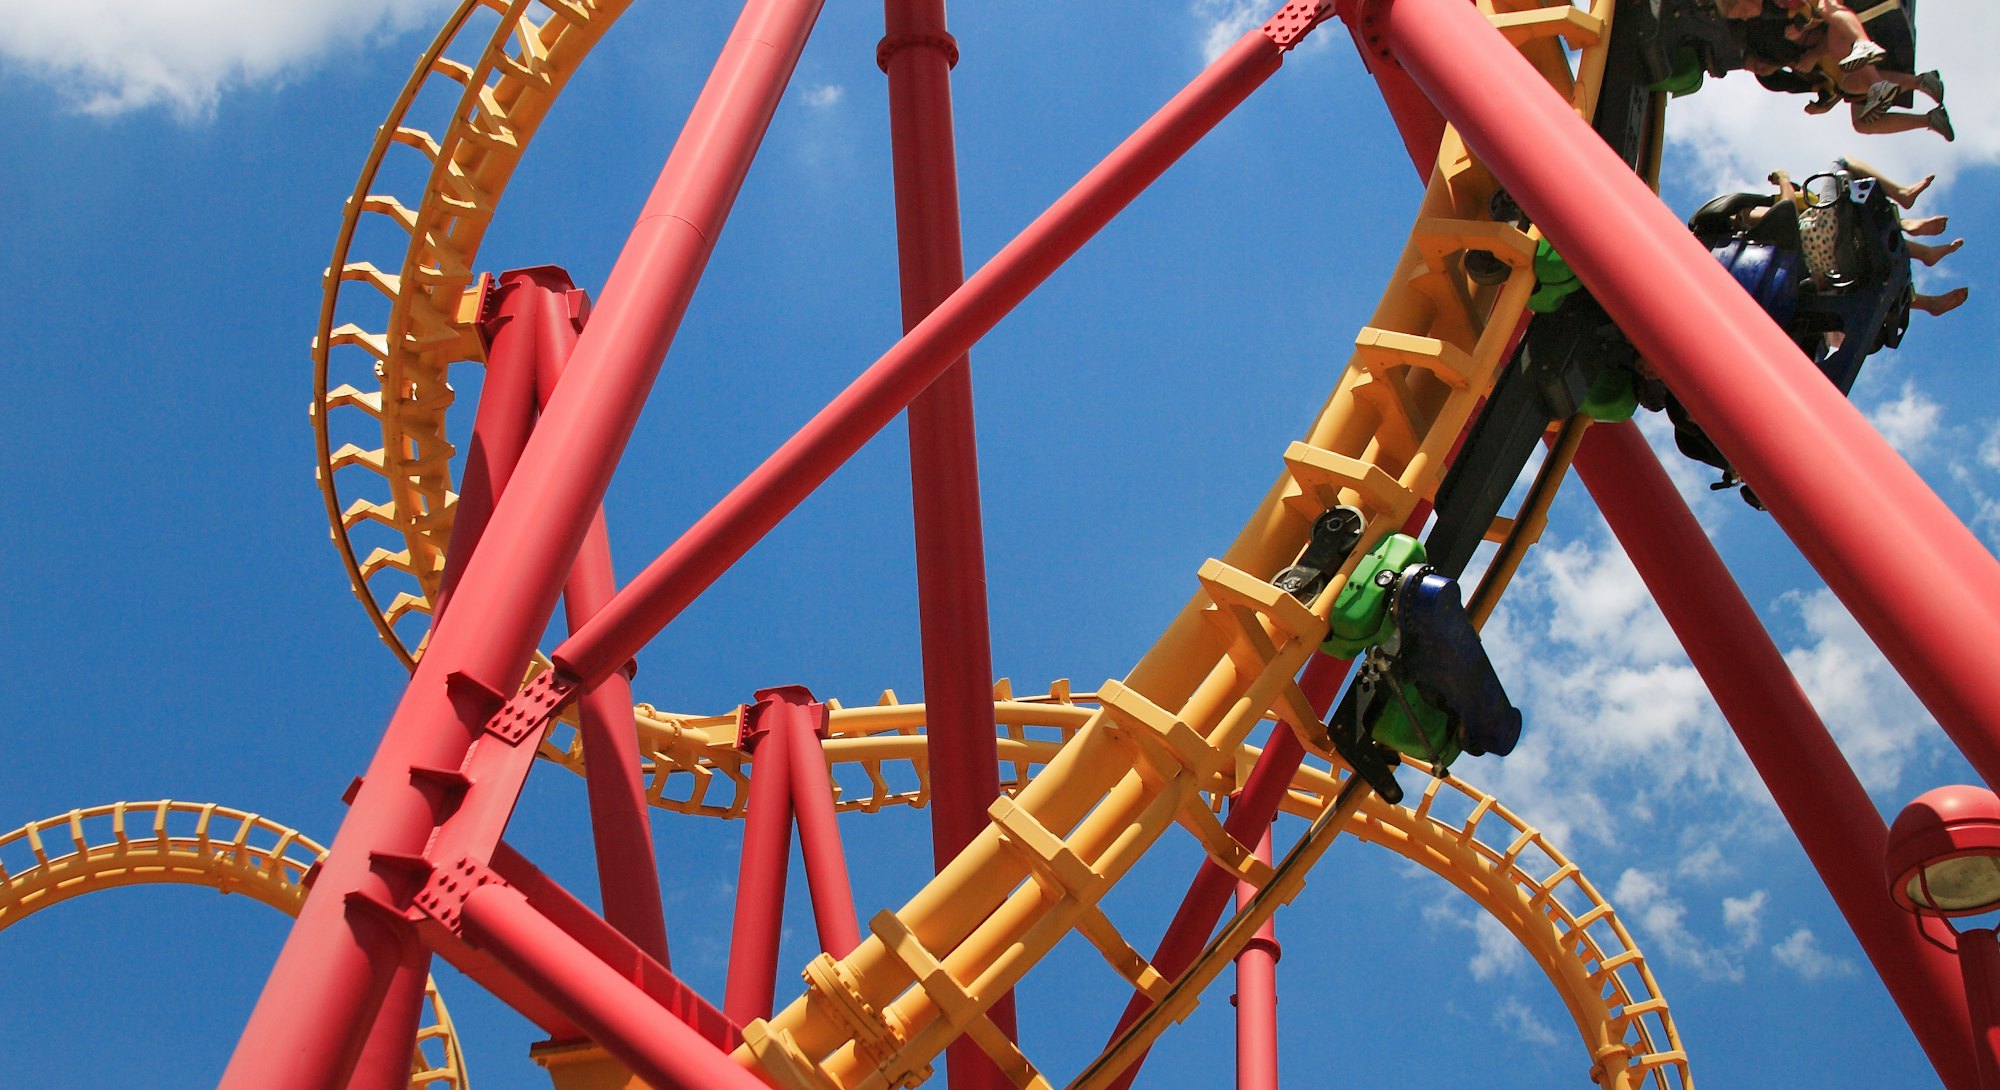 Scary Upside Down Fun With A Colorful Looping Roller Coaster On A Beautiful Sunny Day At The Amuseme...